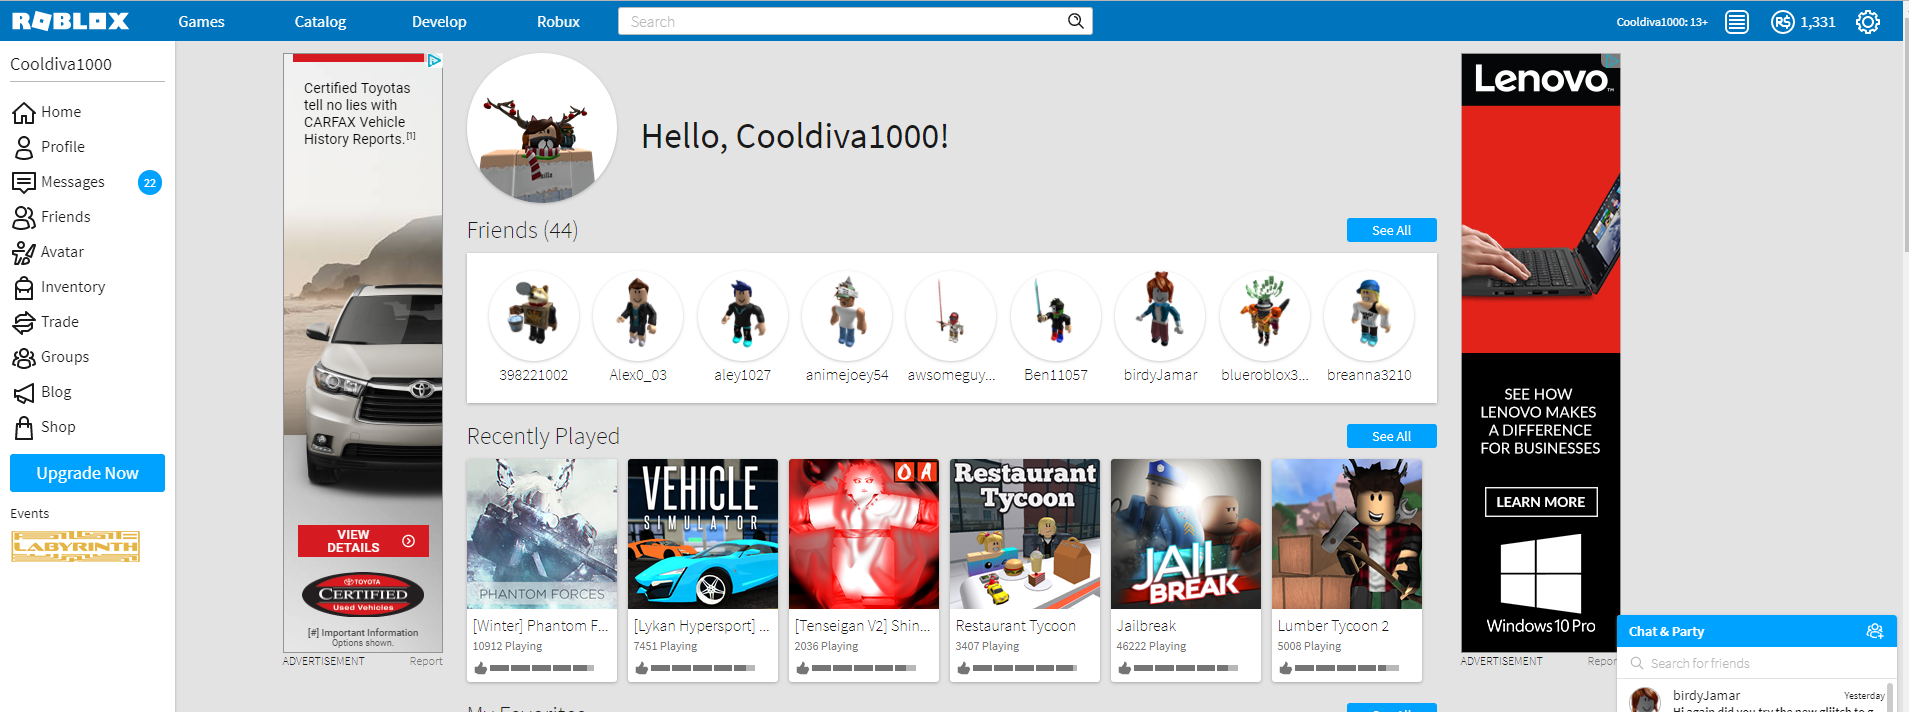 Selling High End 2009 2009 Roblox Female Account Playerup Accounts Marketplace Player 2 Player Secure Platform - female roblox player